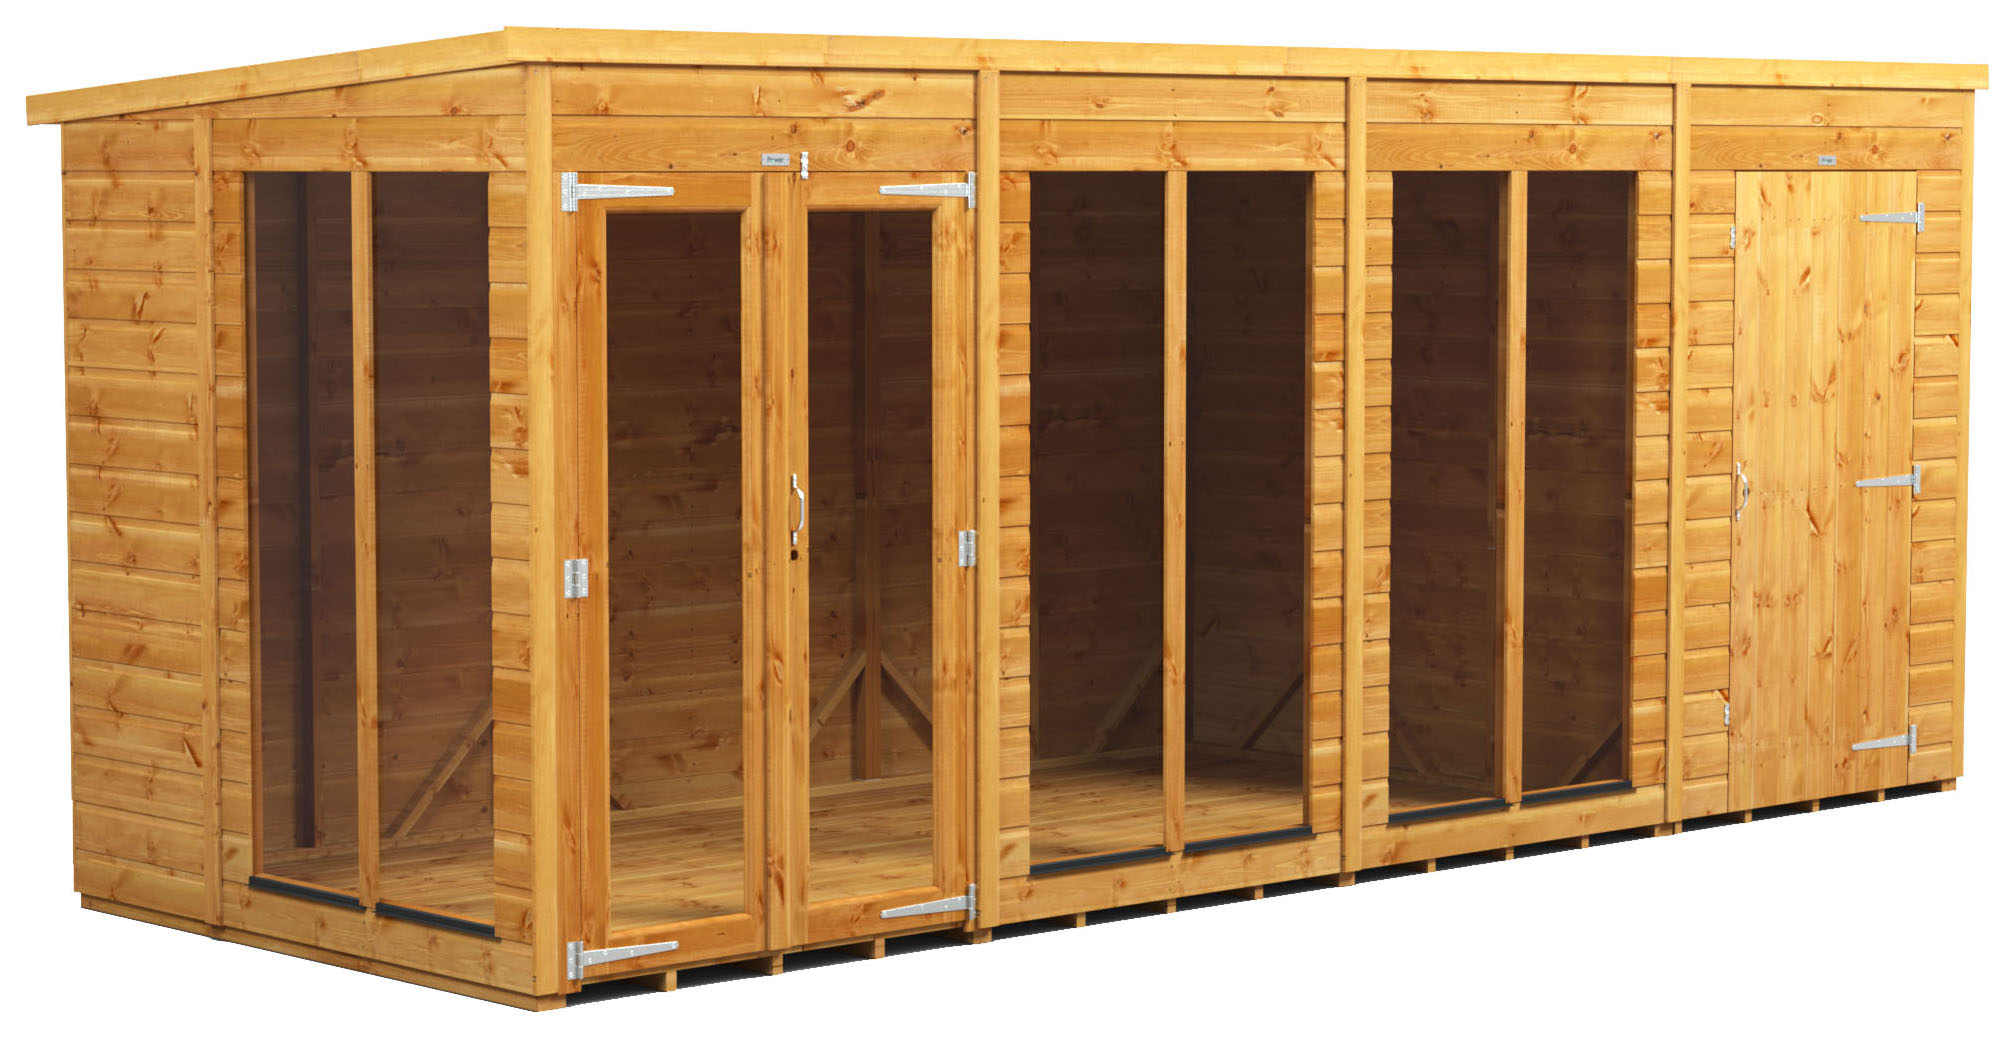 Image of Power Sheds 16 x 6ft Pent Shiplap Dip Treated Summerhouse - Including 4ft Side Store